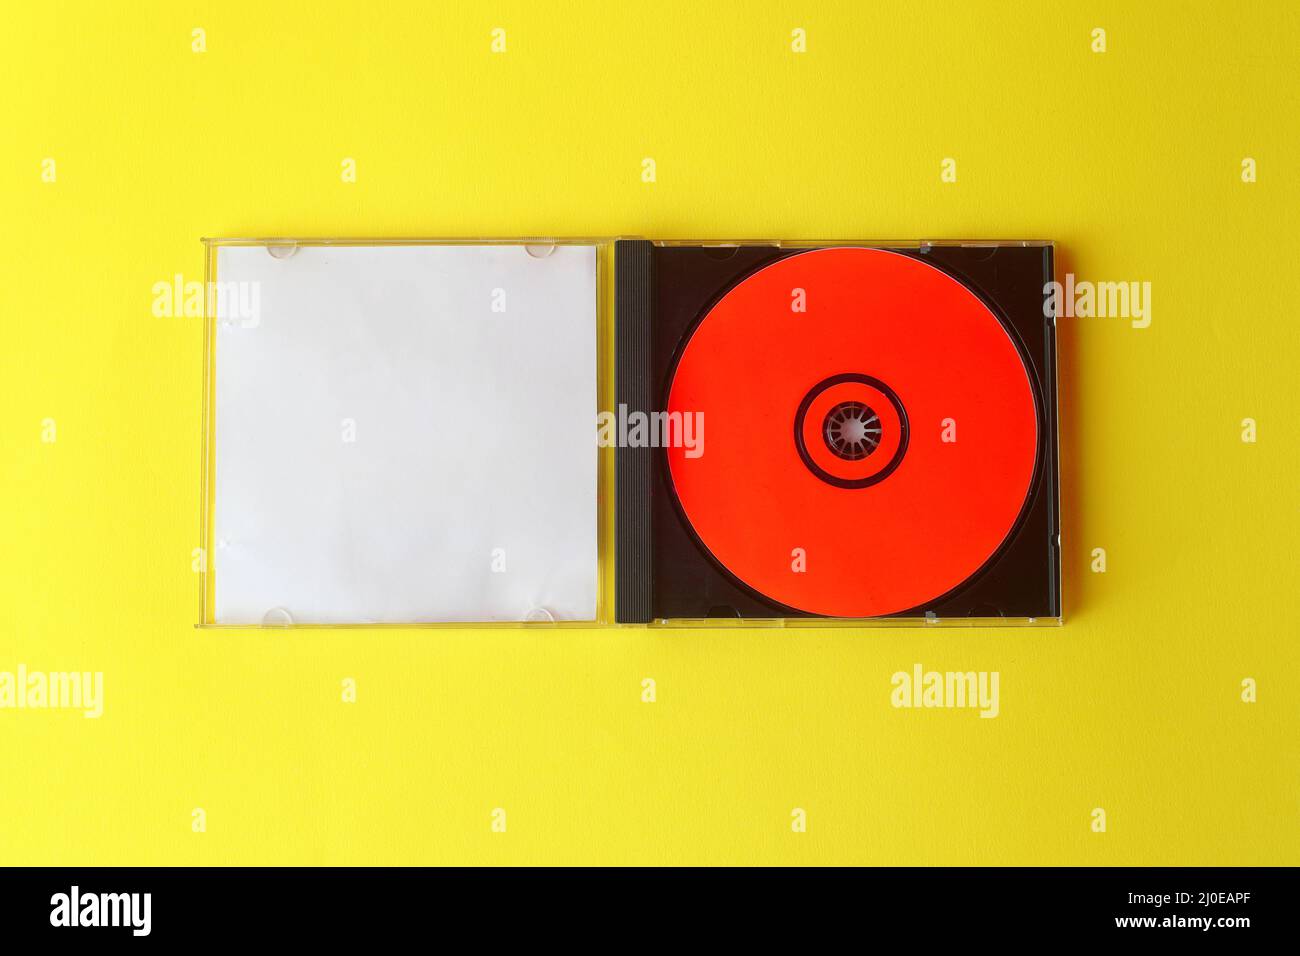 Close-Up Of Compact Discs Over White Background Stock Photo